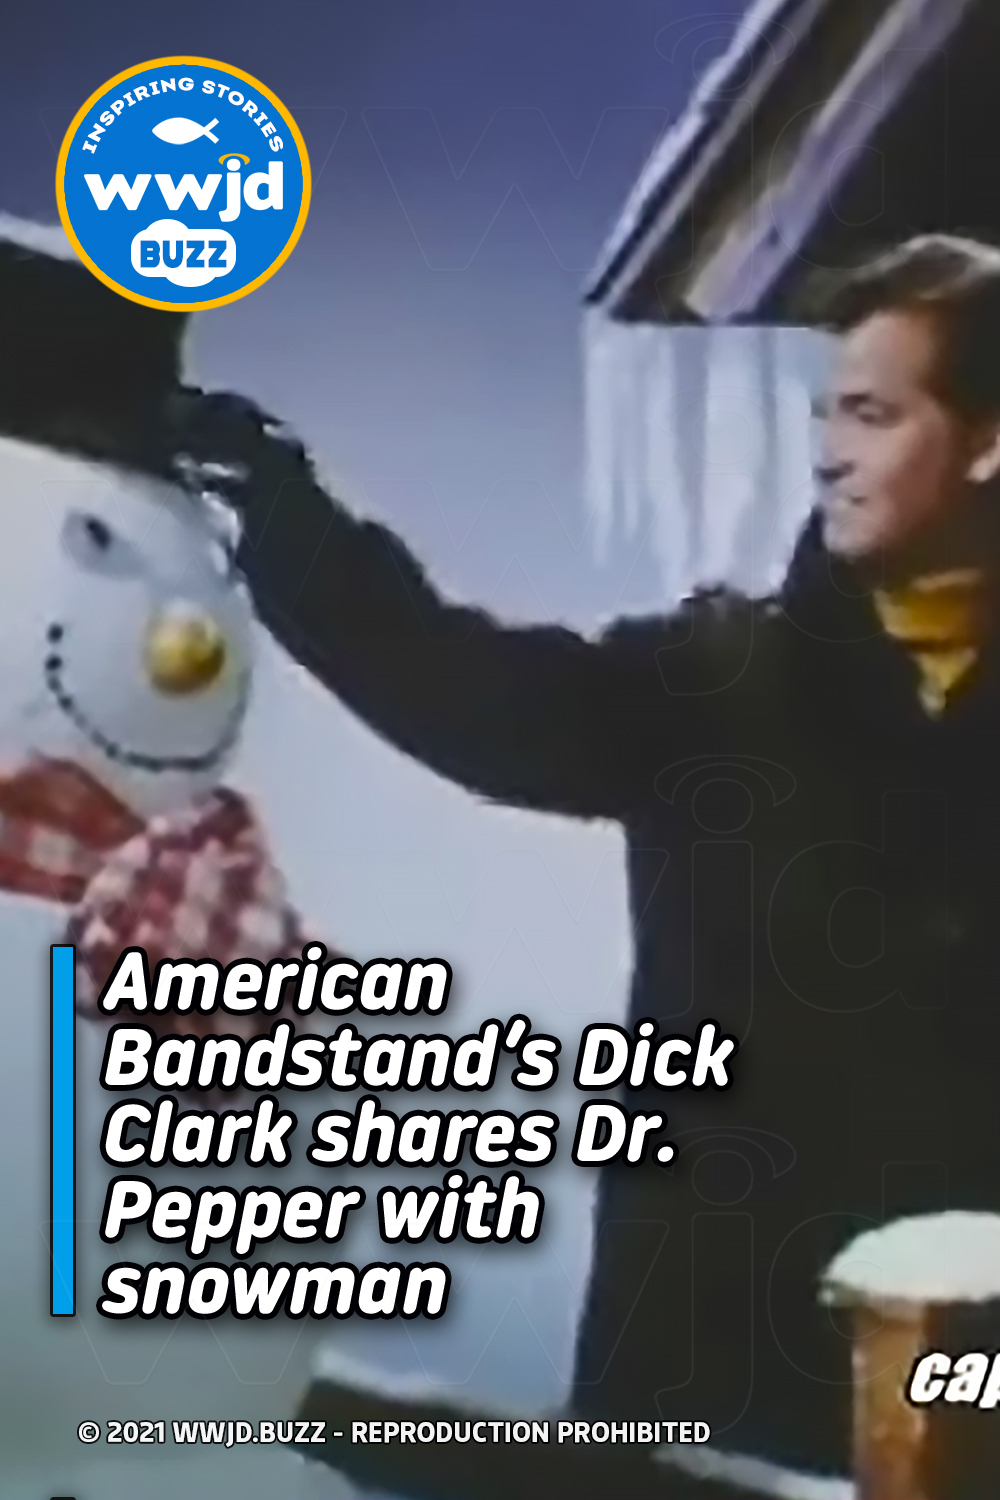 American Bandstand’s Dick Clark shares Dr. Pepper with snowman